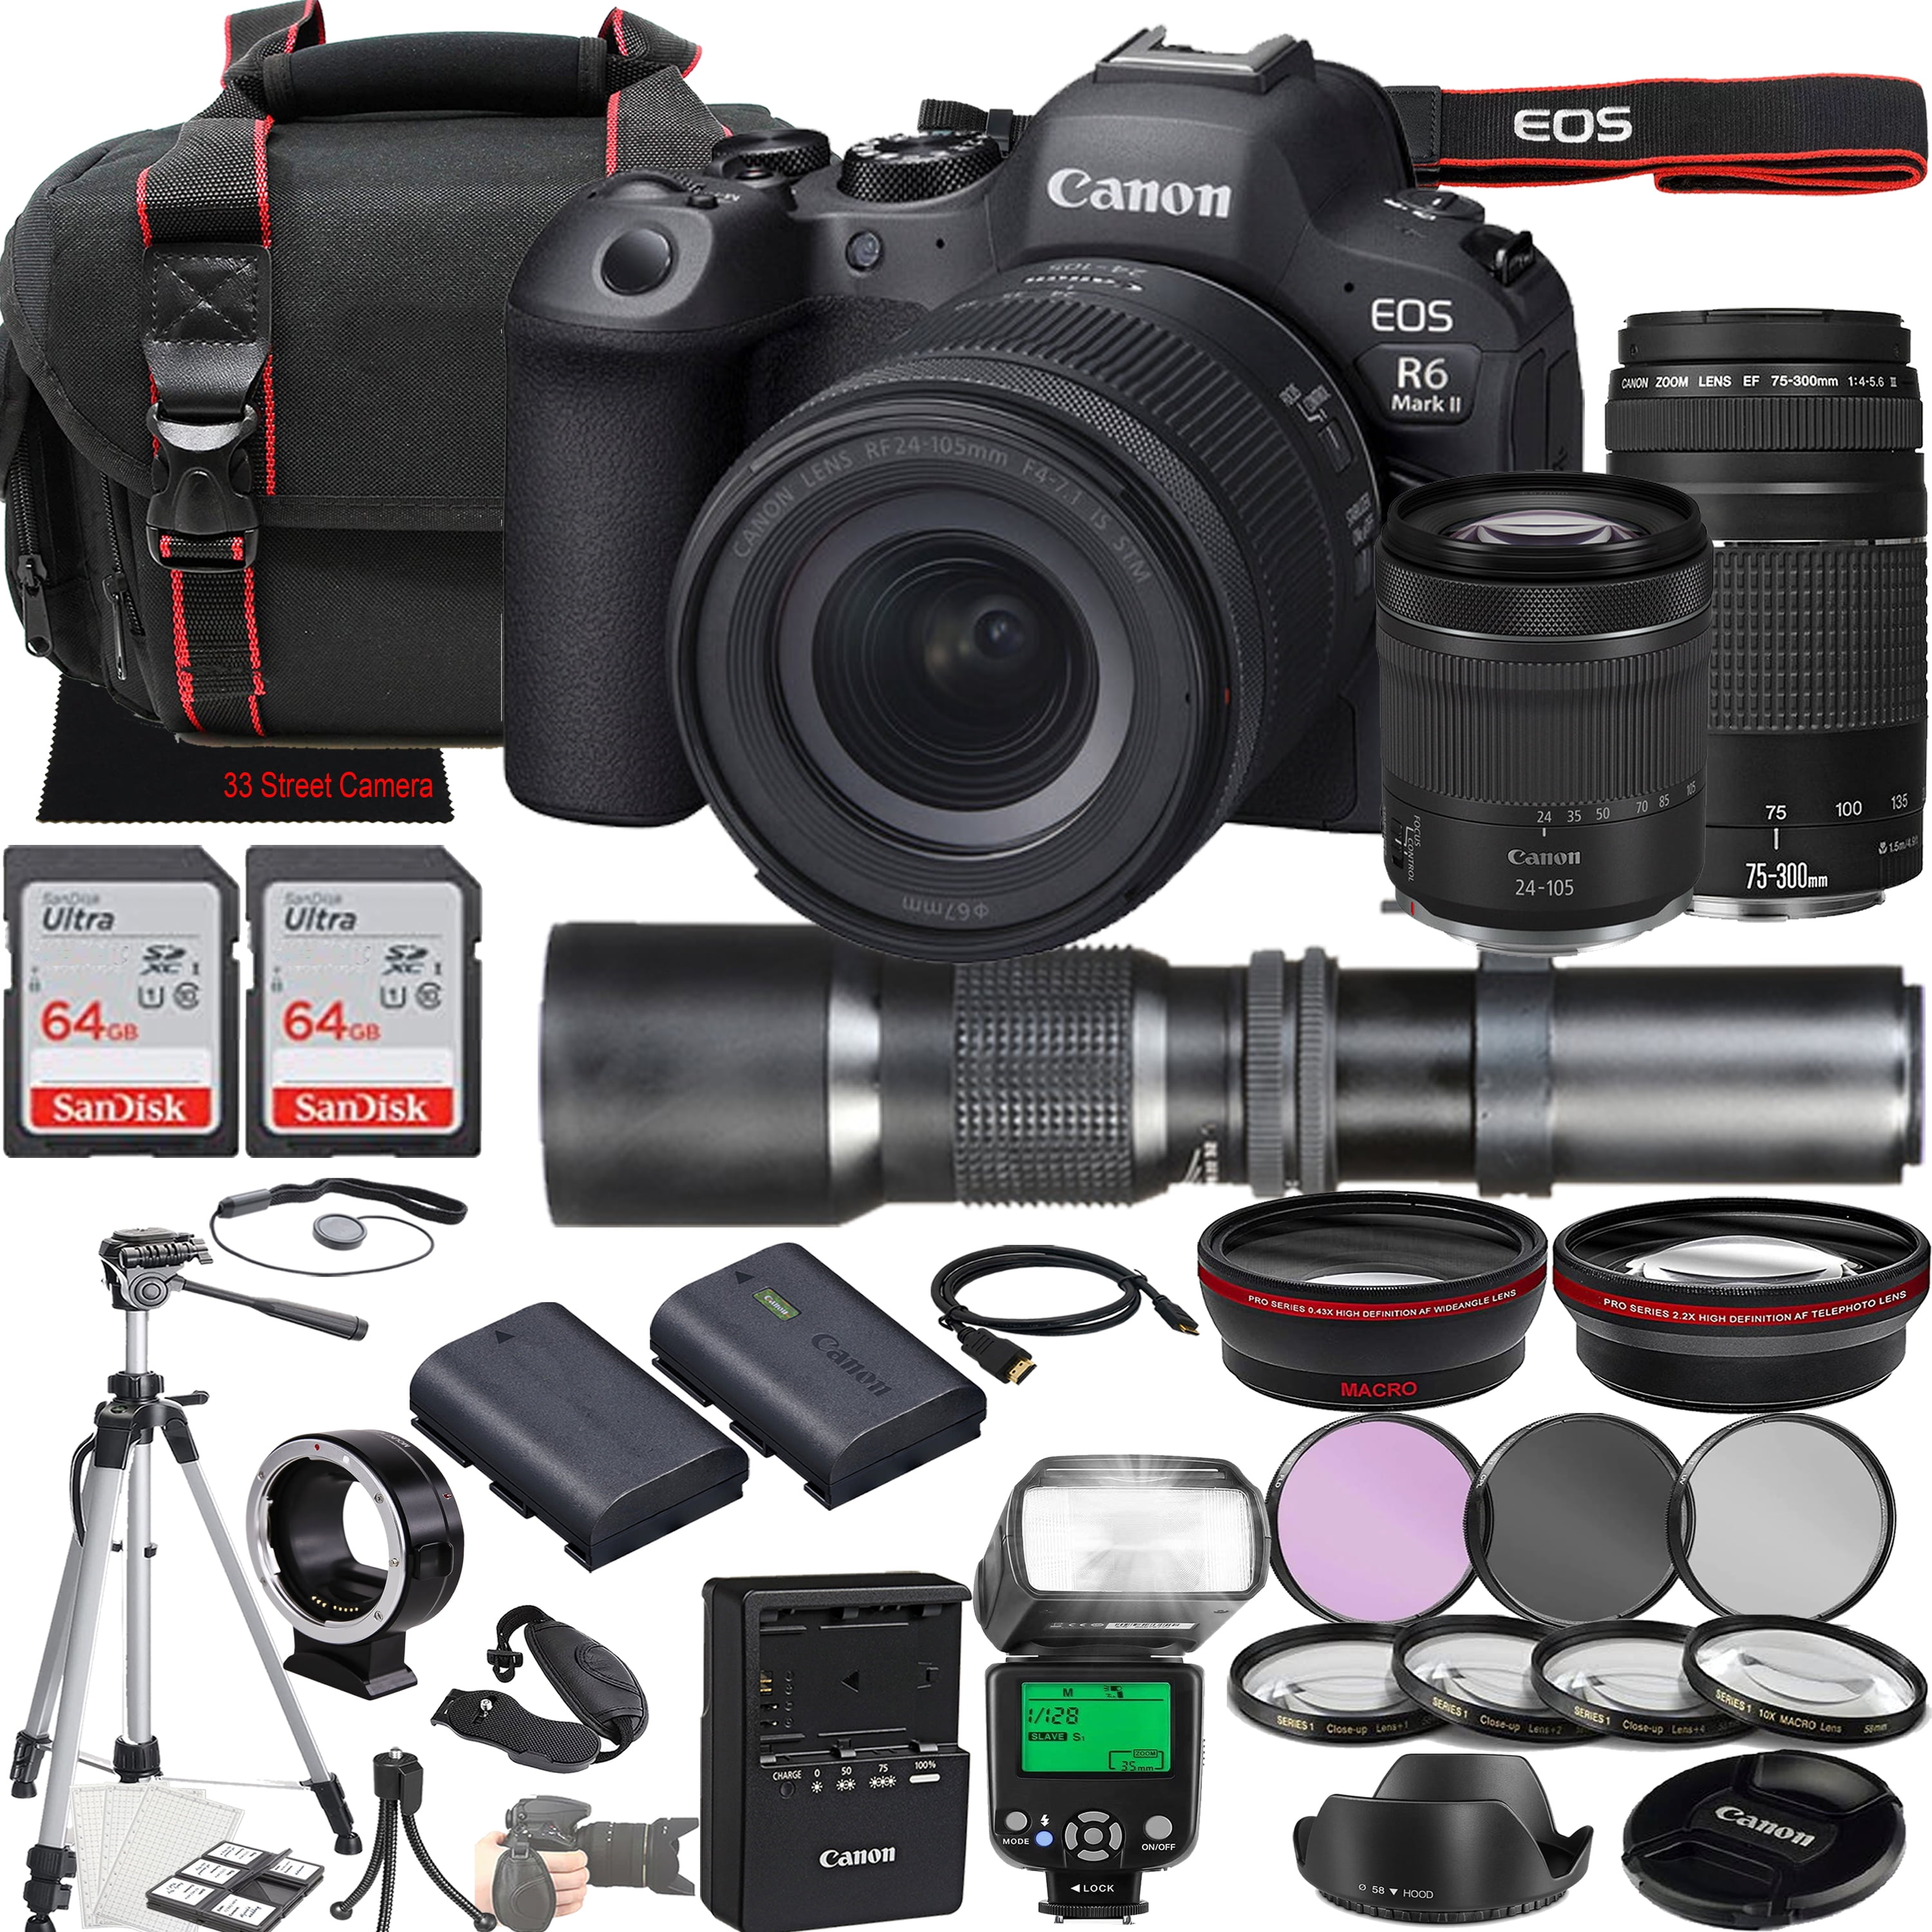 Canon EOS R6 Mark II Mirrorless Camera with RF 24-105mm STM & 75-300mm III  + 500mm f/8 Focus Lenses, Accessories: 2X 64GB Memory Cards, LED Video  Light, Microphone, Extra Battery, Case 